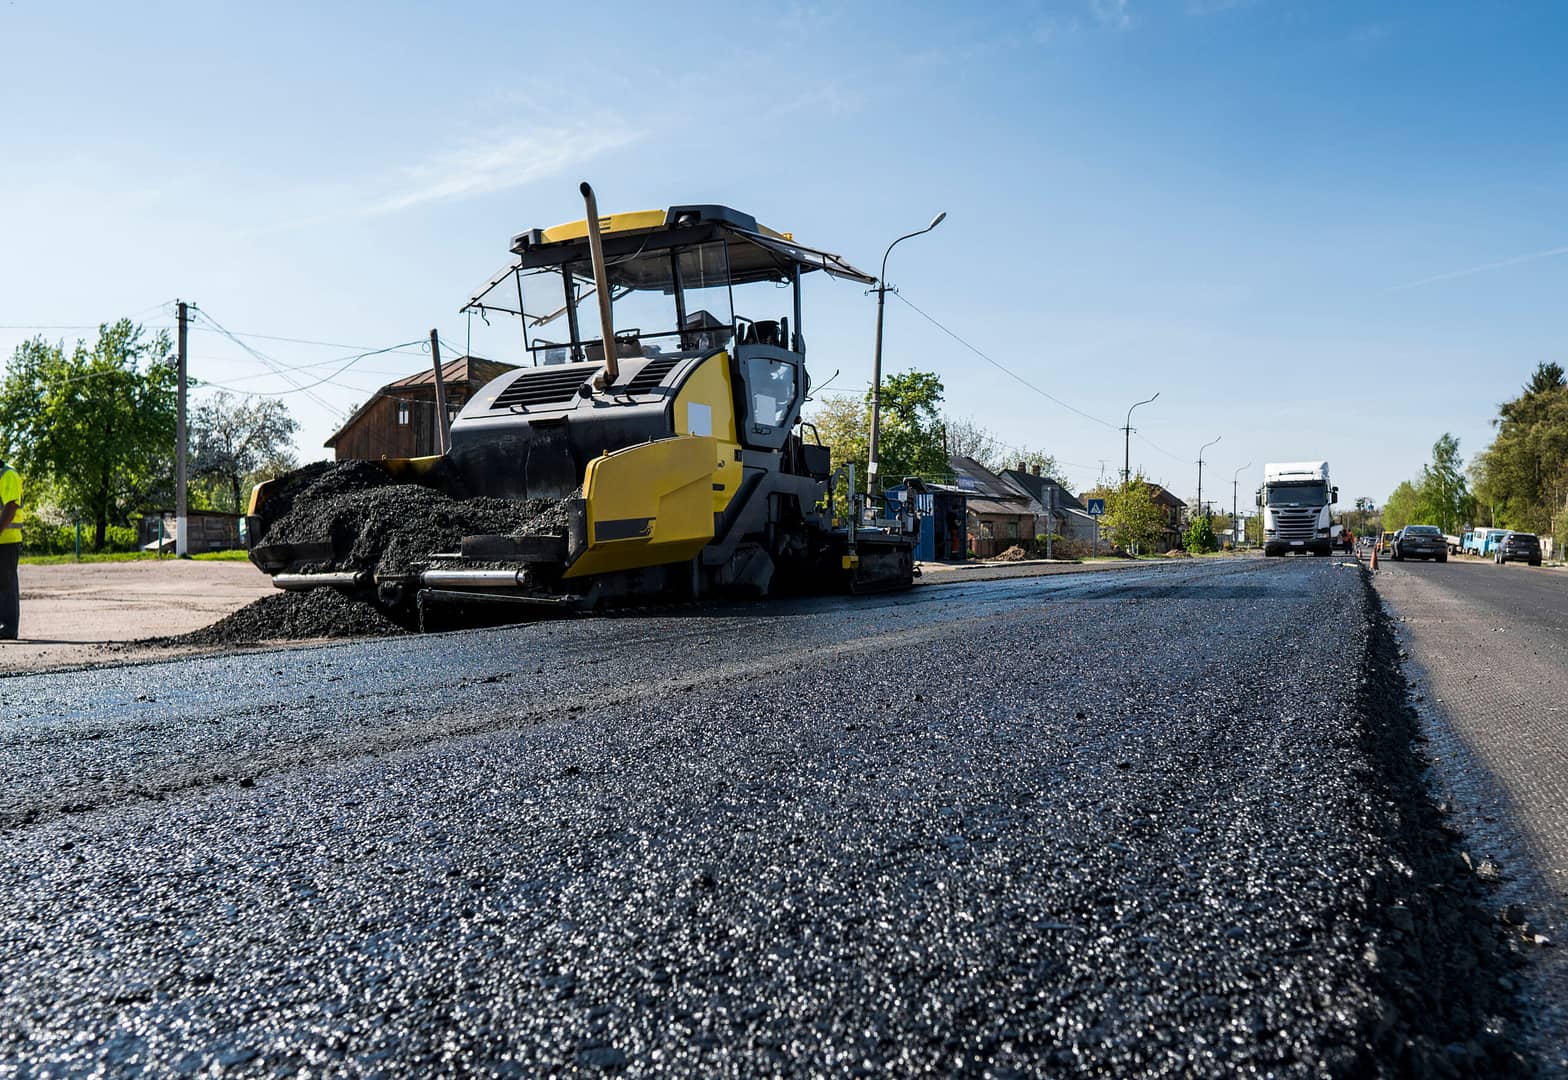 An asphalt paver finisher in action, smoothly laying down a fresh layer of asphalt on the road.